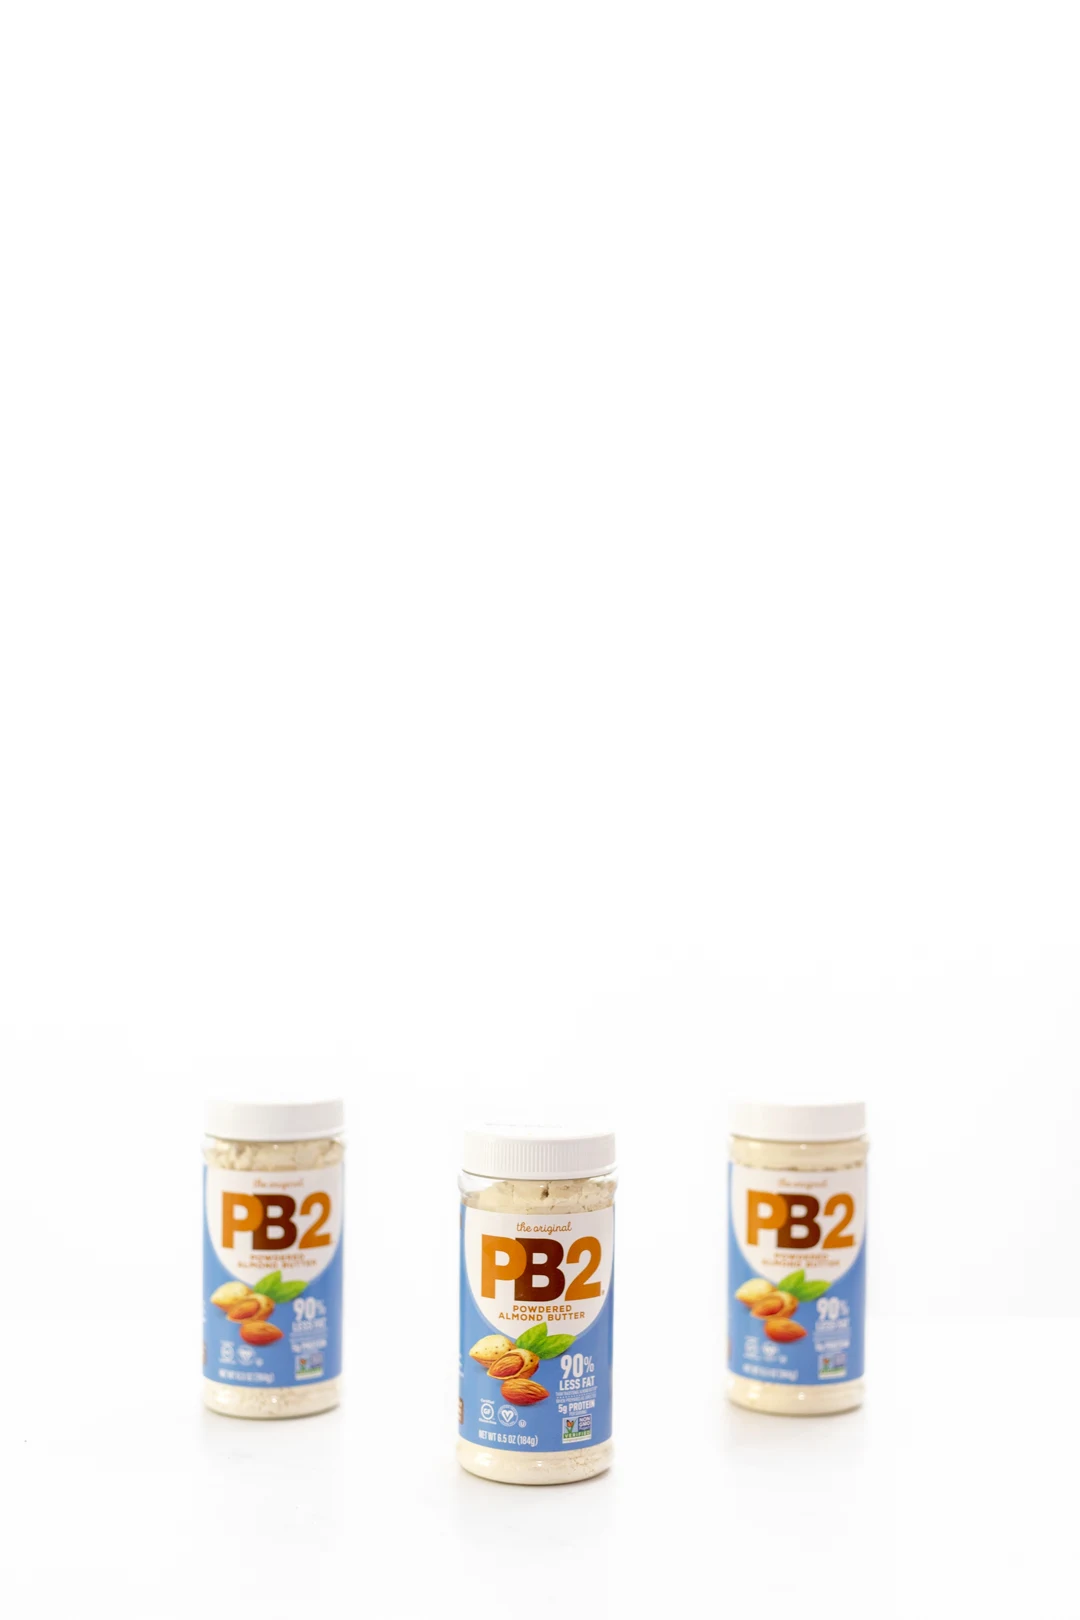 PB2 canisters